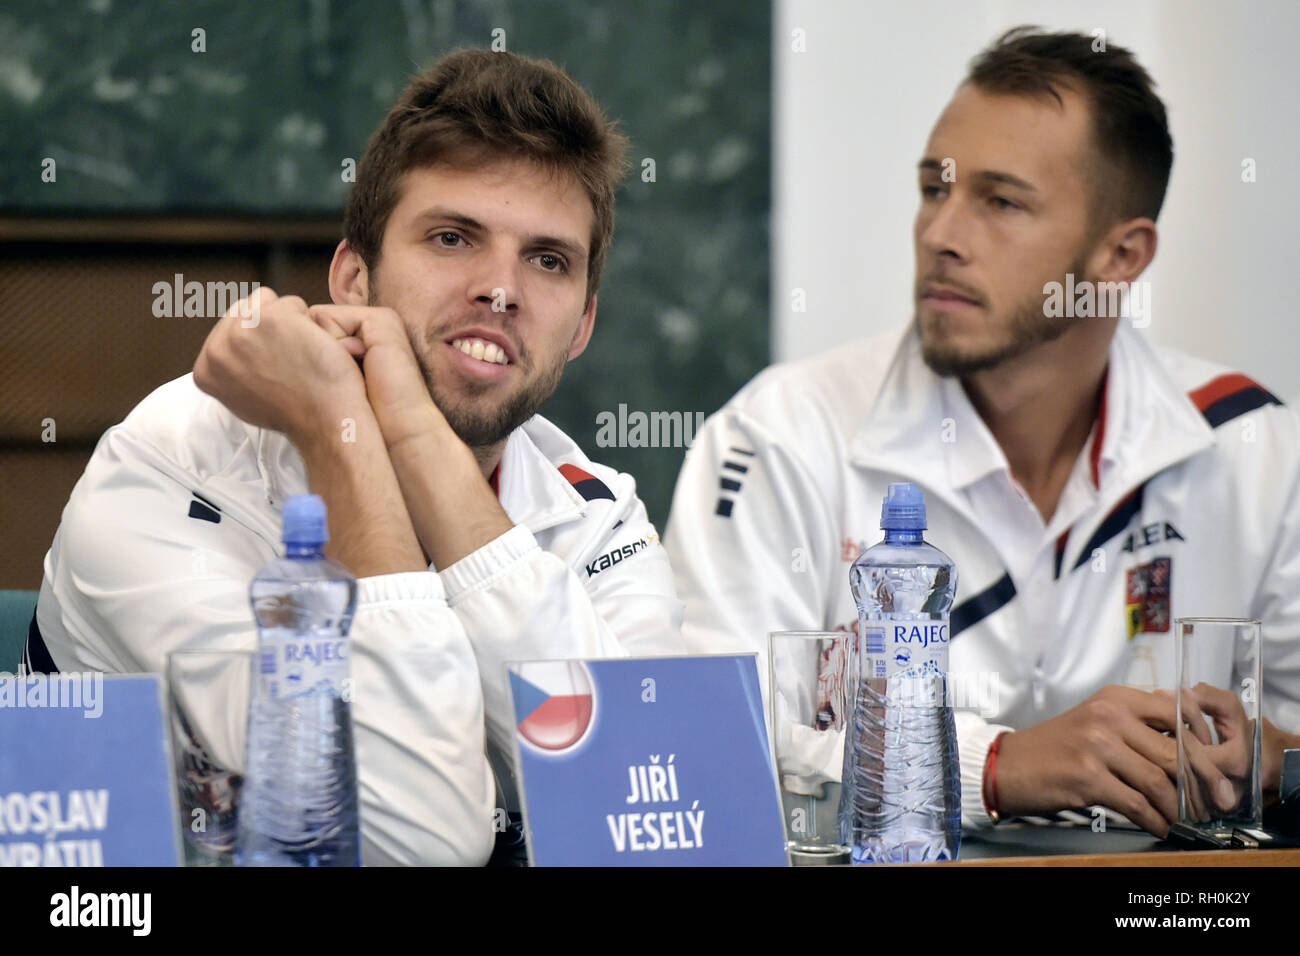 Ostrava, Czech Republic. 31st Jan, 2019. L-R Czech tennis players Jiri Vesely and Lukas Rosol attend drawing lots to decide on games of Davis Cup tennis tournament qualification between the Czech Republic and the Netherlands, on January 31, 2019, in Ostrava, Czech Republic. The qualification starts on February 1. Credit: Jaroslav Ozana/CTK Photo/Alamy Live News Stock Photo